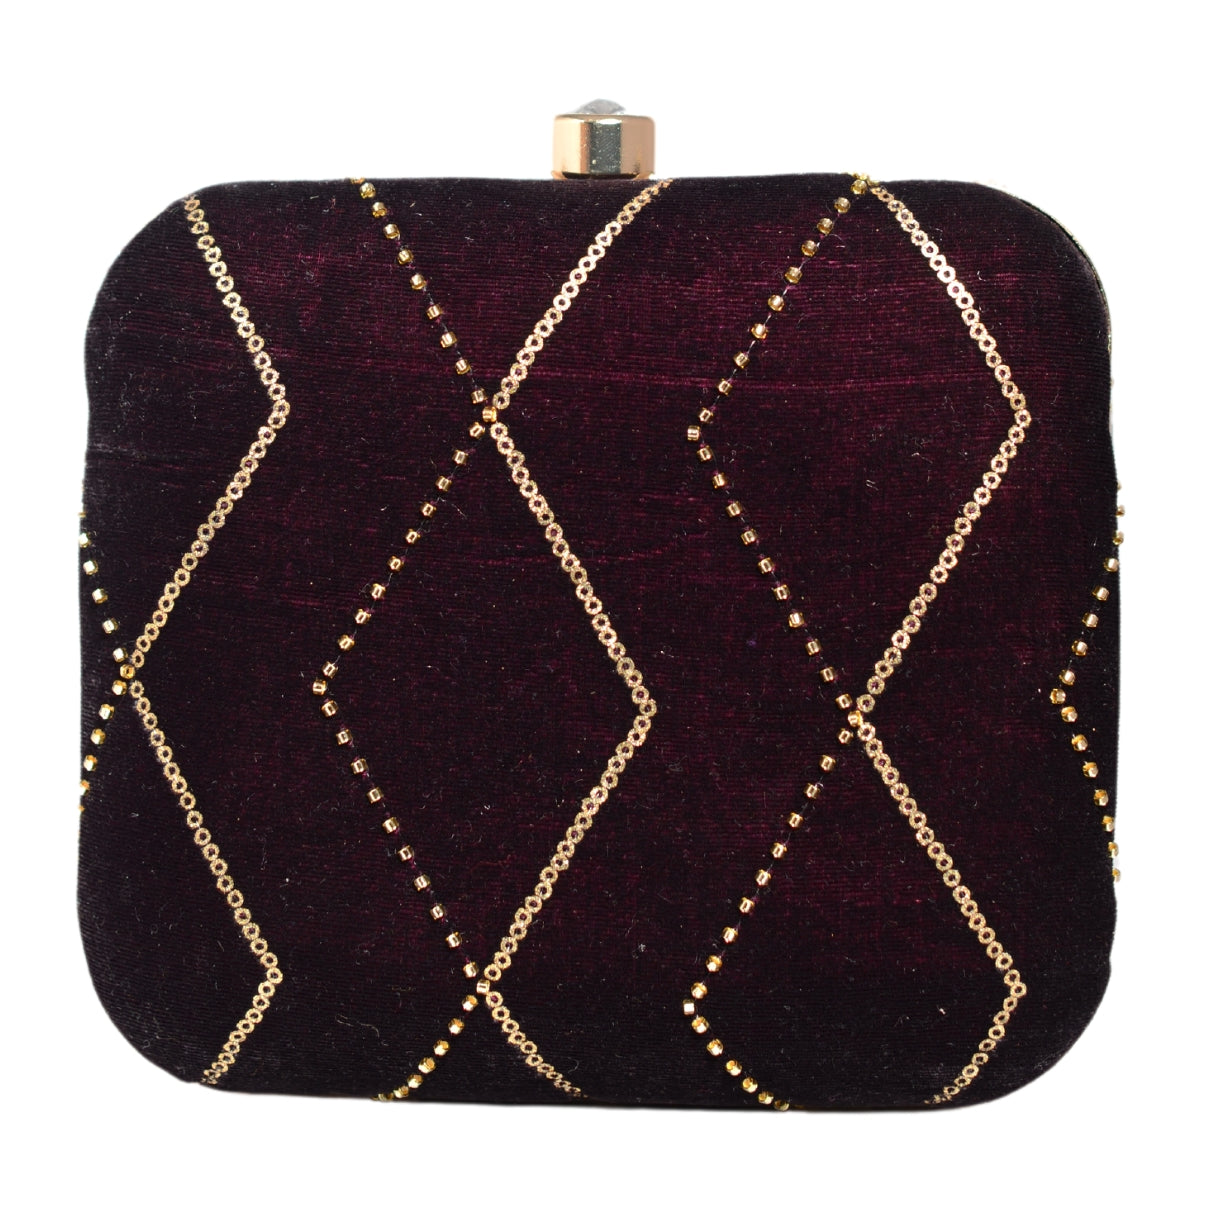 Wine And Golden Embroidery Party Clutch